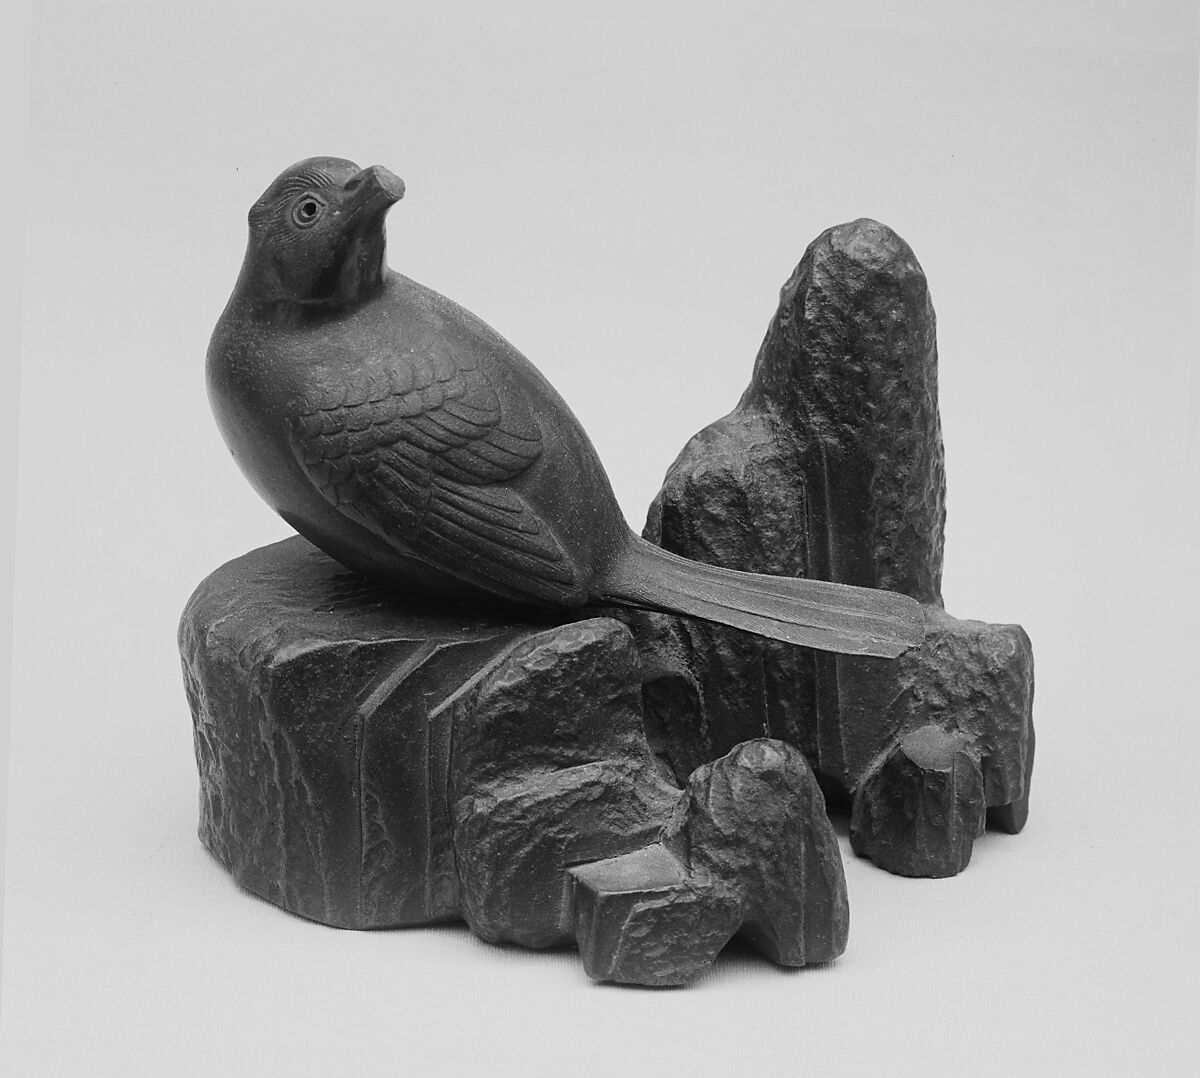 Ornament in the Shape of a Pigeon on a Rock, Clay covered with a thin glaze (Bizen ware), Japan 